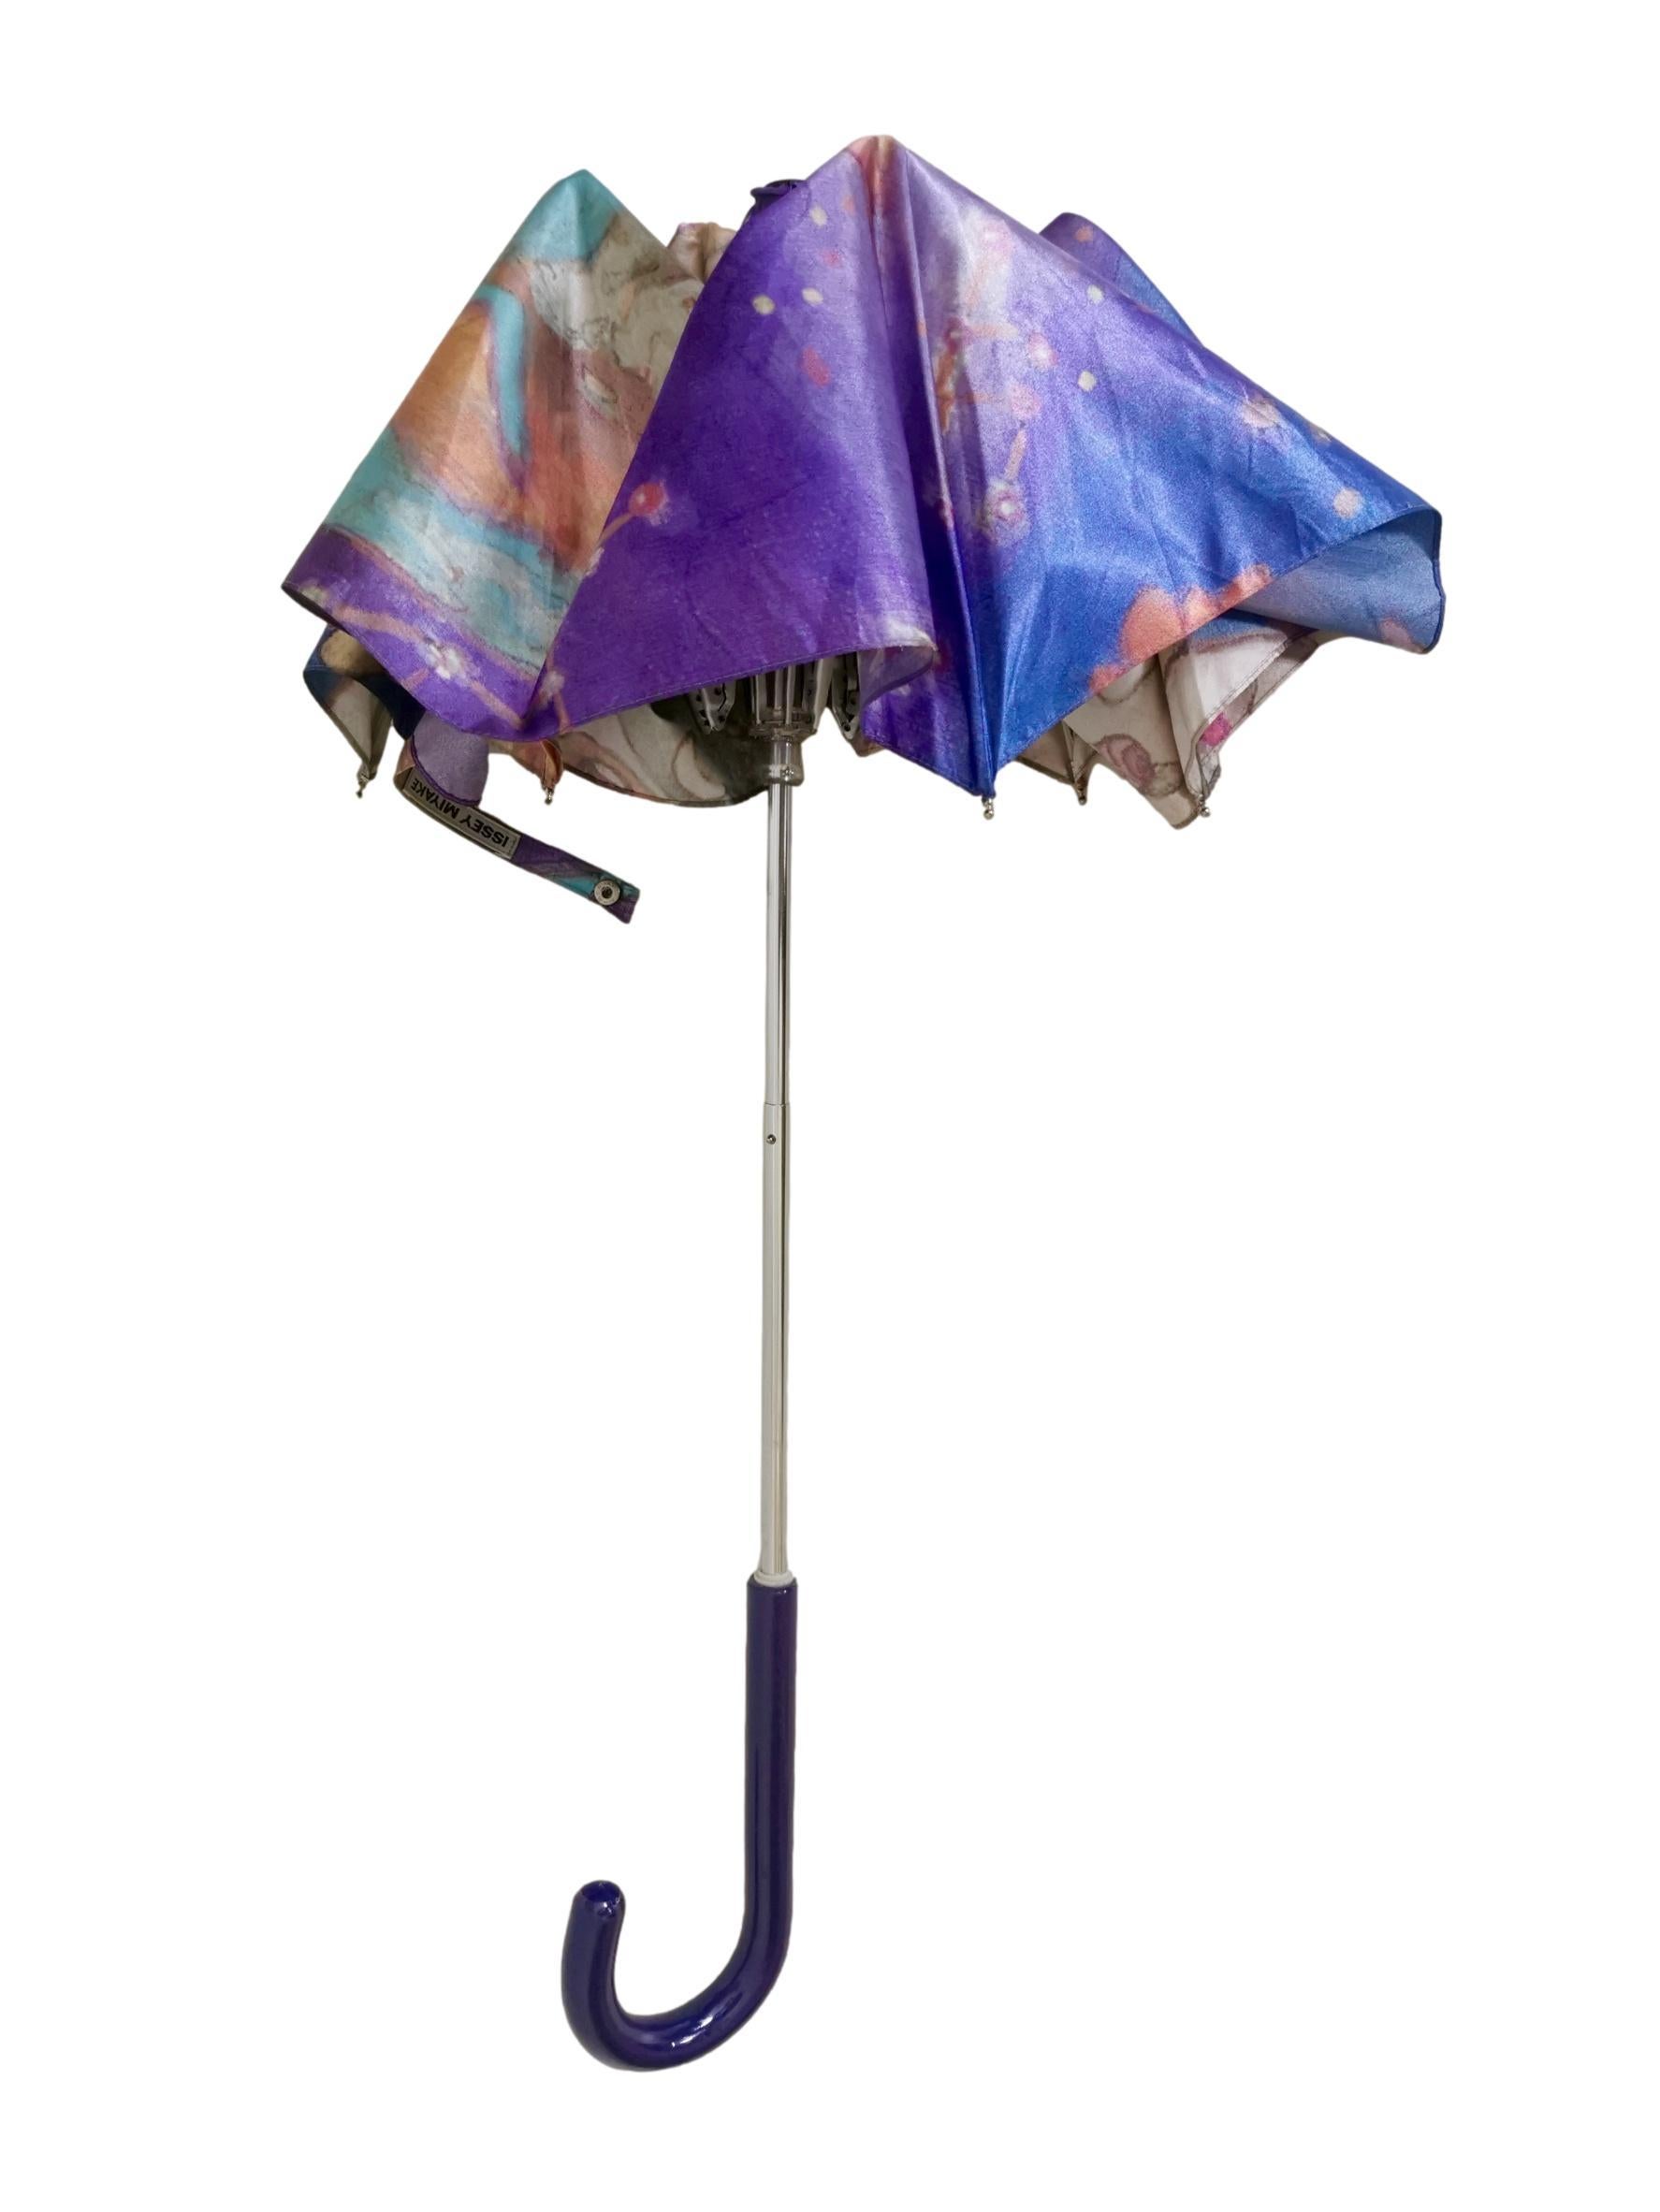 Women's or Men's Issey Miyake Aya Takano 2004 Limited Edition Umbrella  For Sale